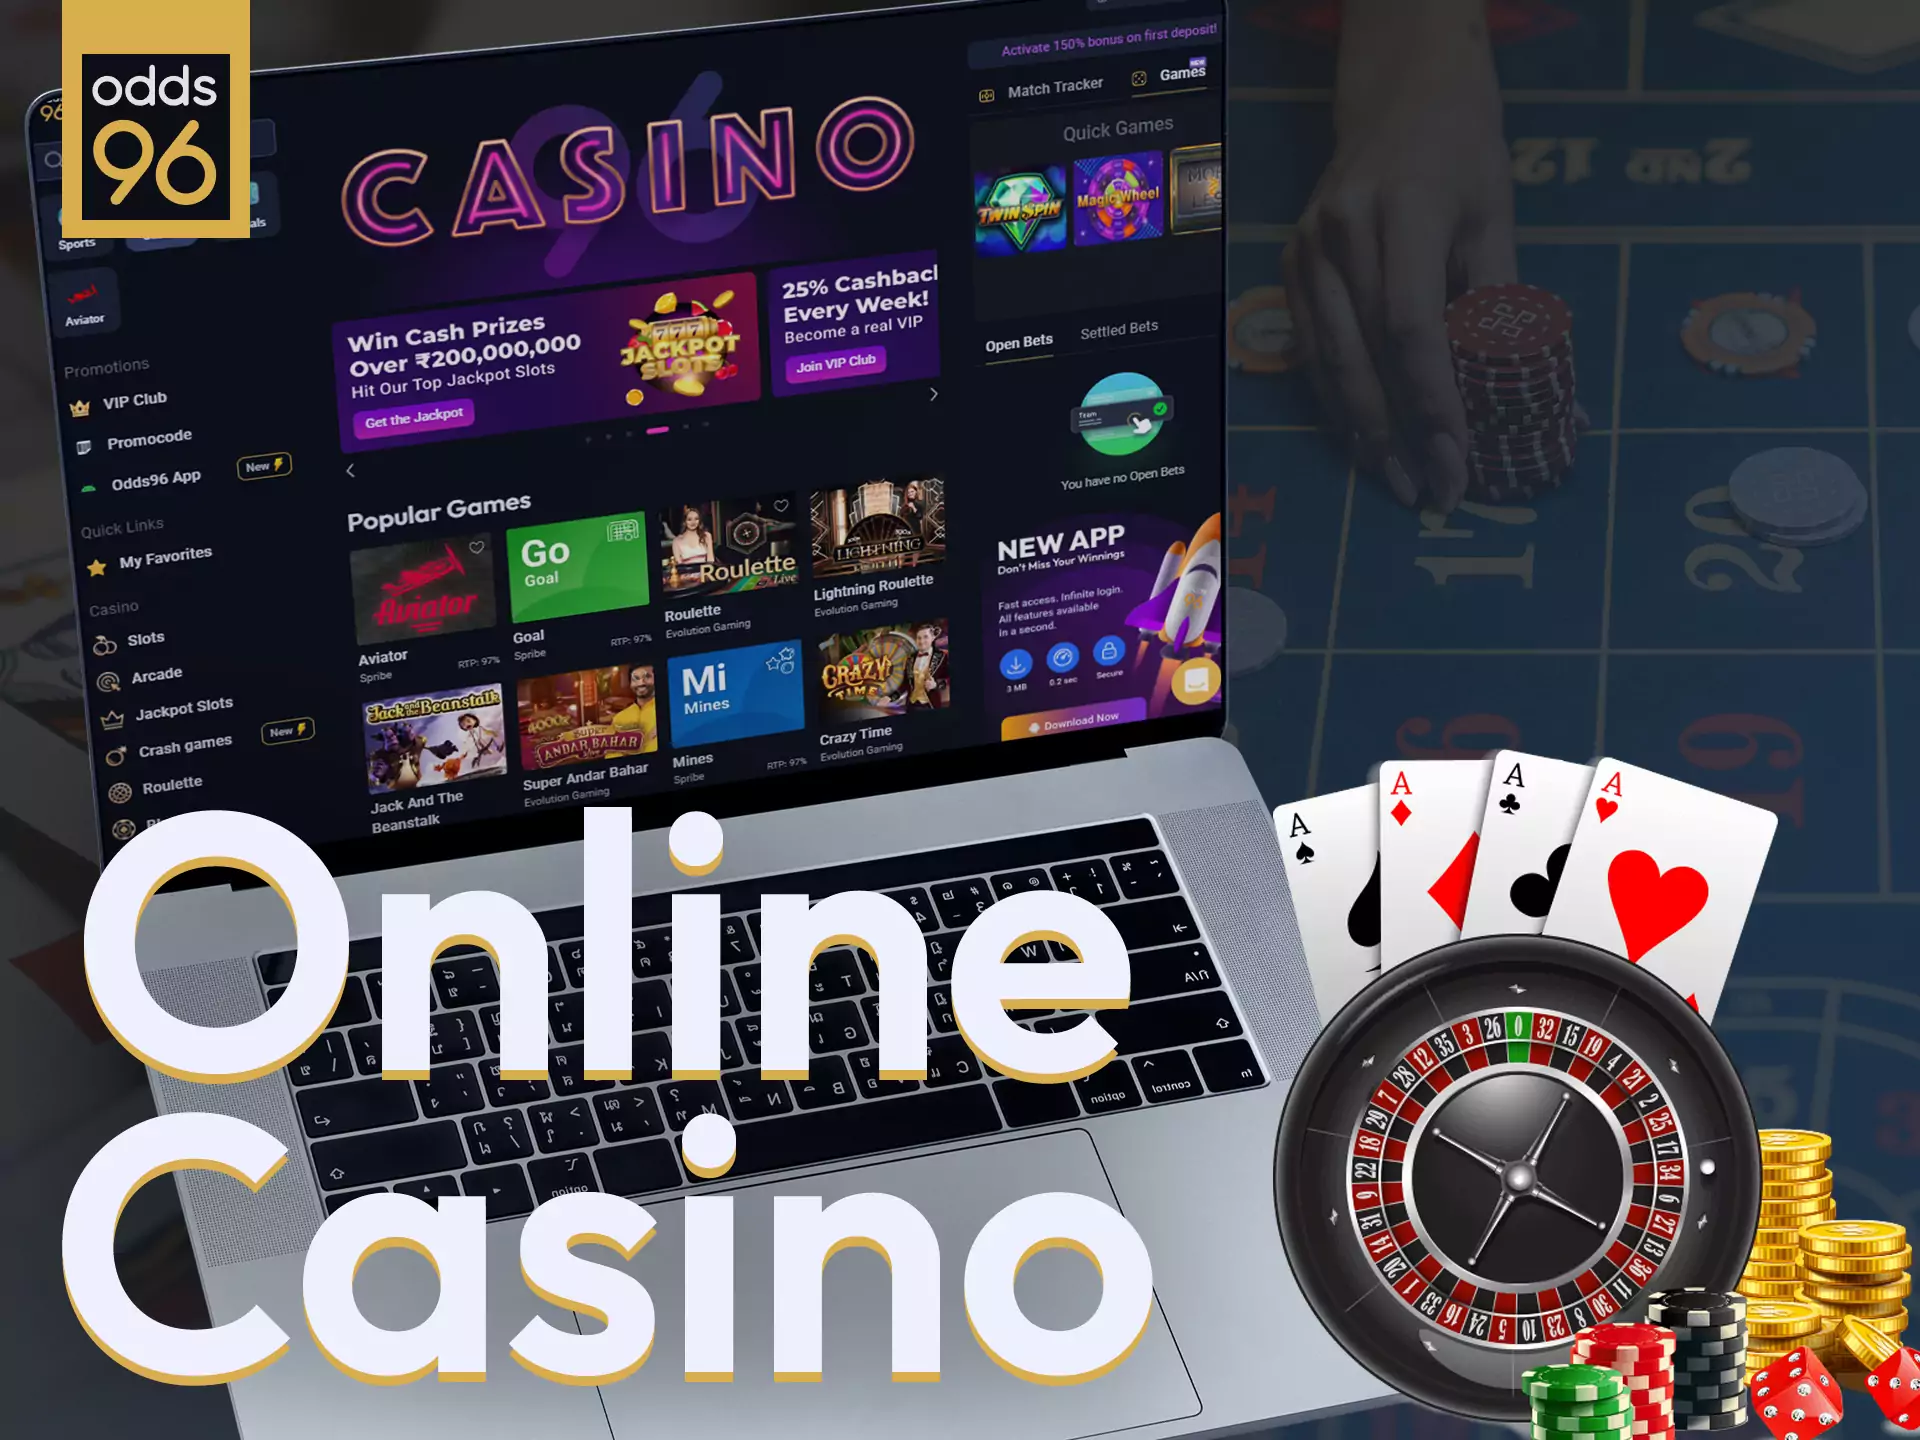 Try betting at Odds96 online casino.